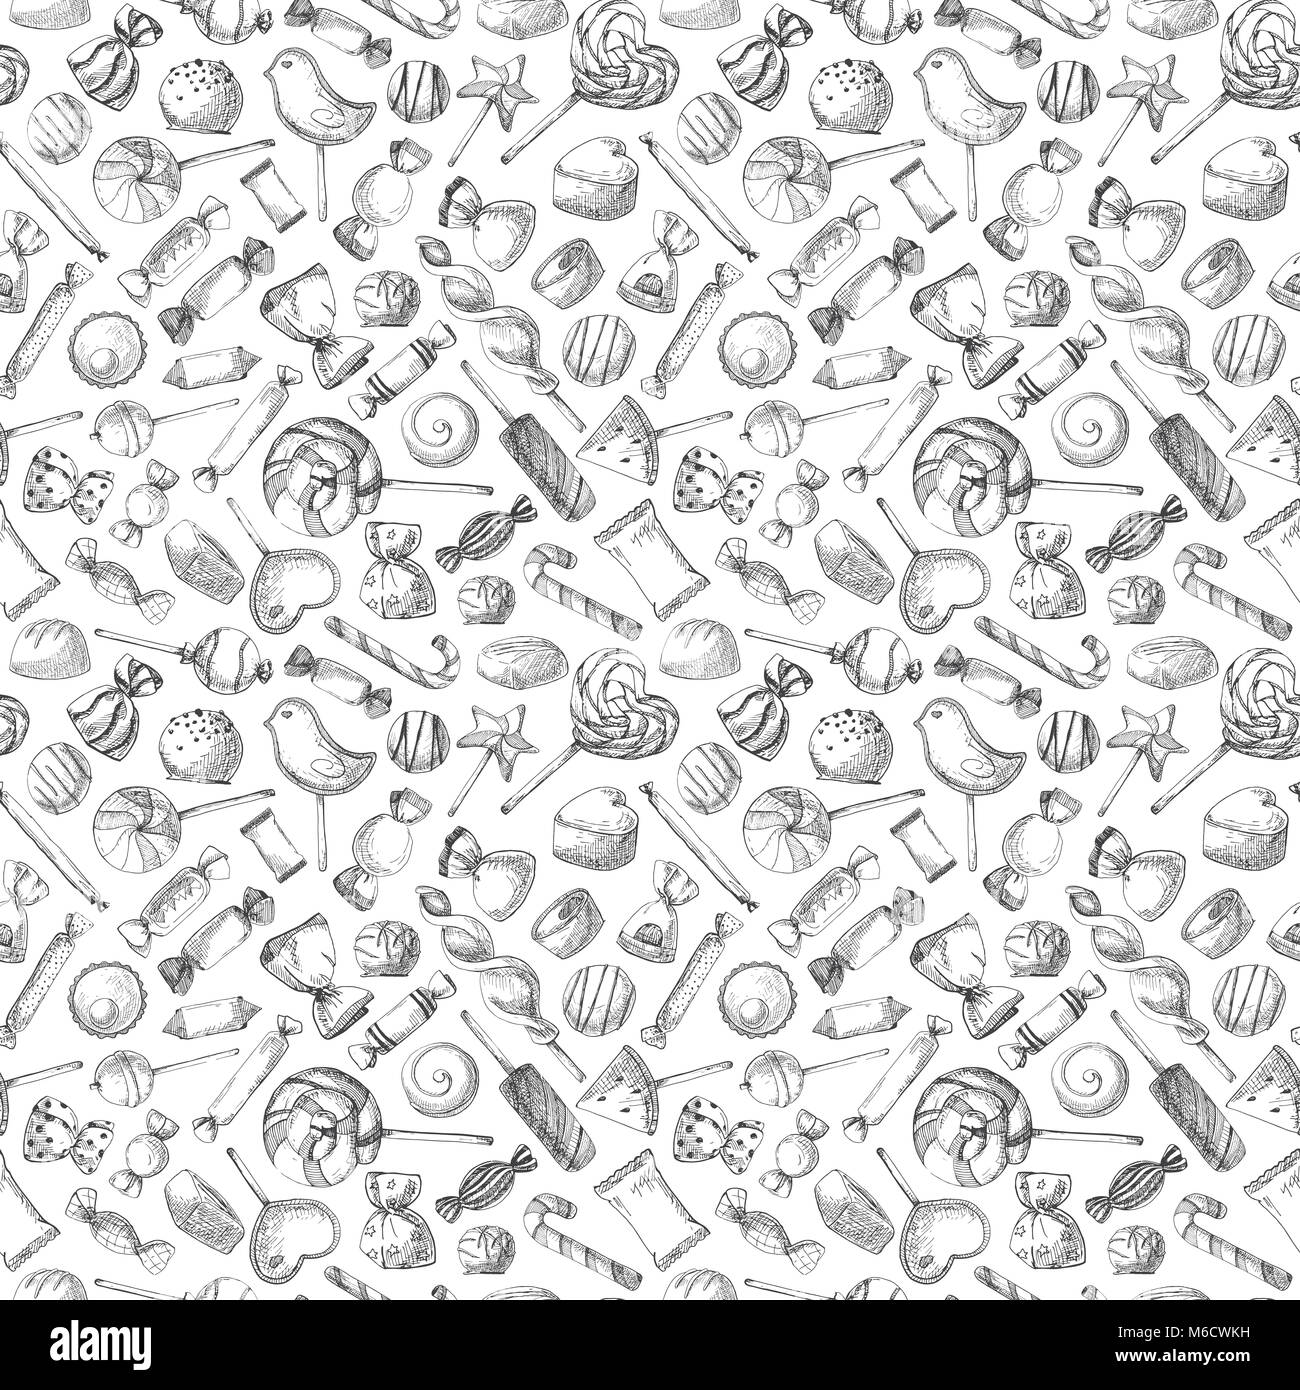 88500 Candy Drawings Illustrations RoyaltyFree Vector Graphics  Clip  Art  iStock